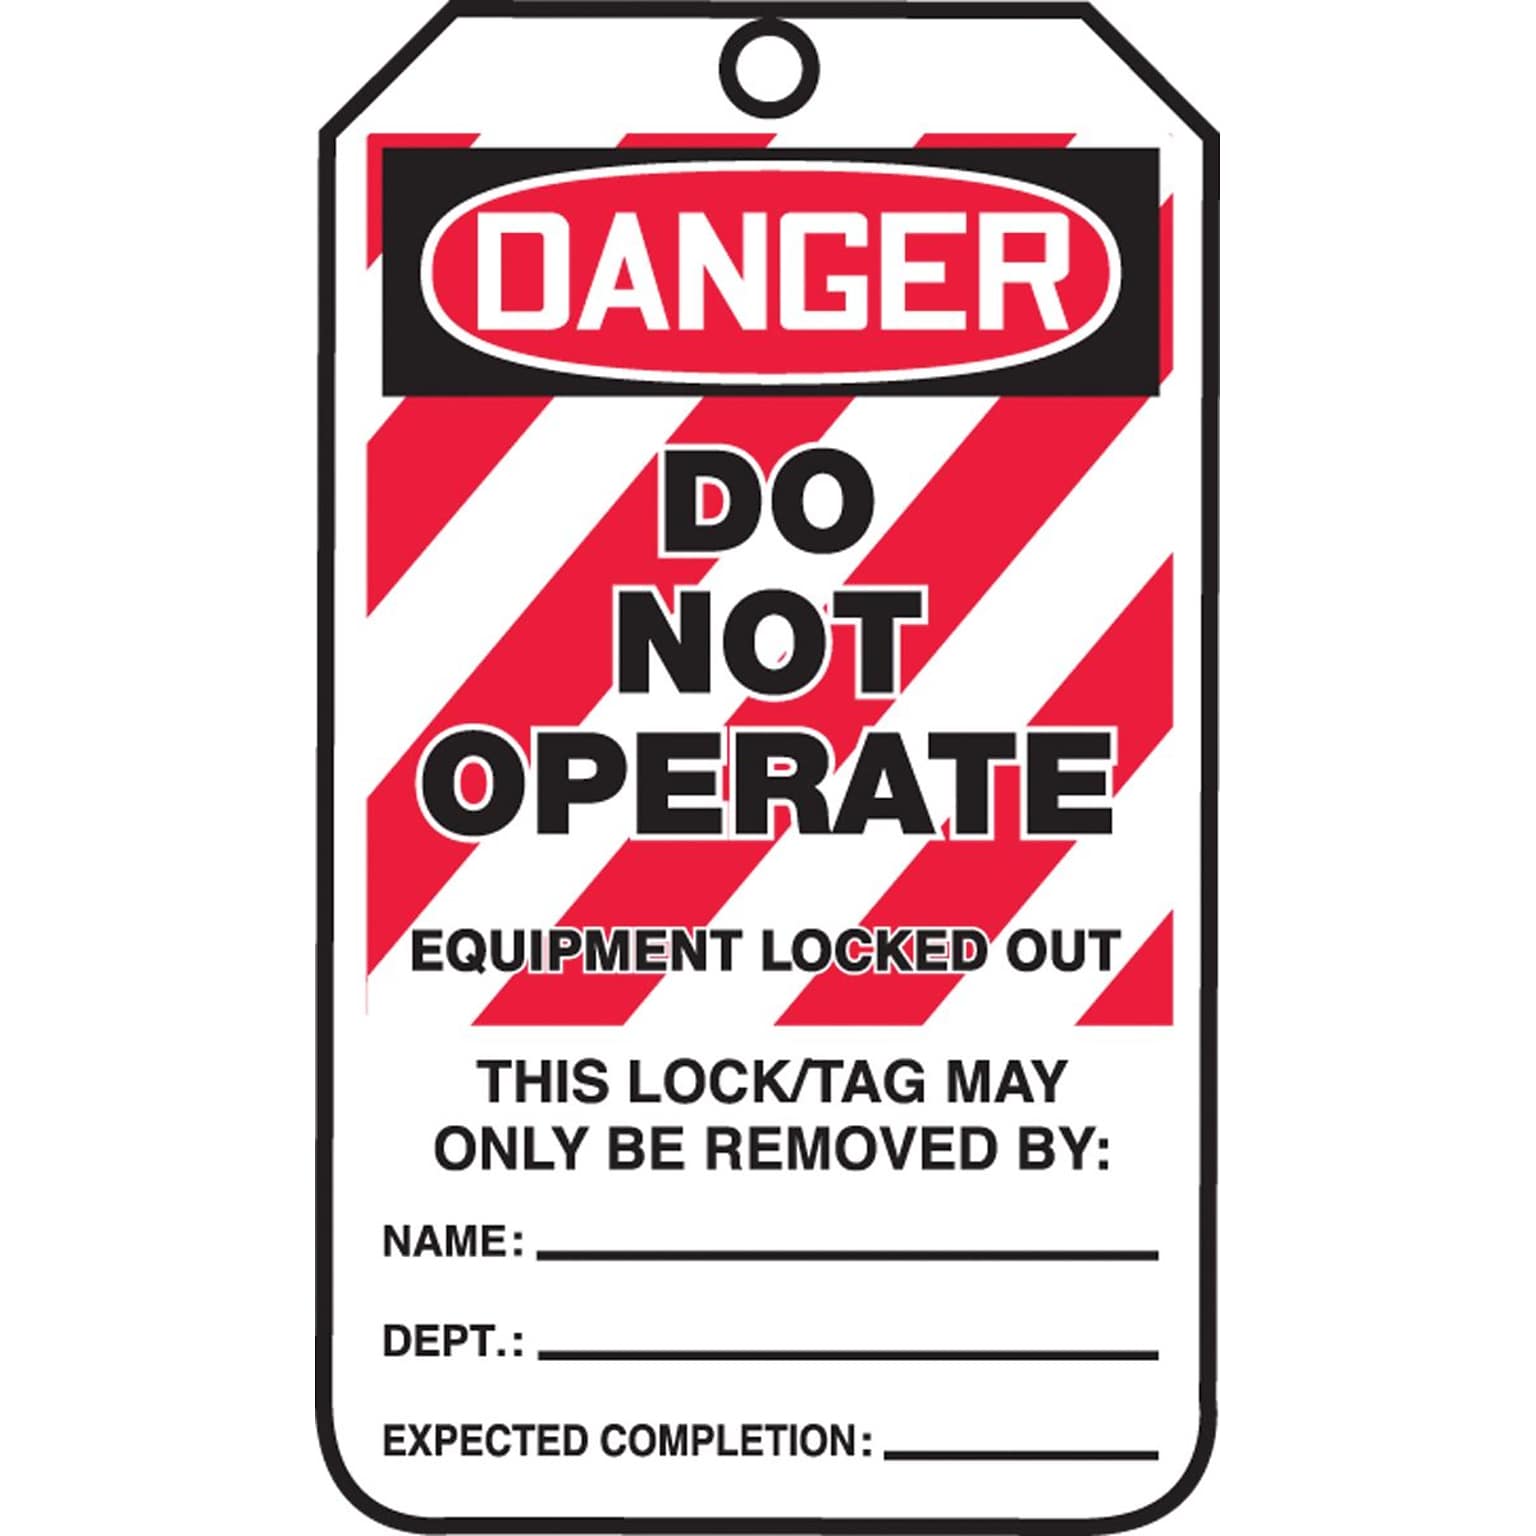 Accuform 5 3/4 x 3 1/4 PF-Cardstock Lockout Tag DANGER..LOCKED OUT, Red/Black On White, 25/Pack (MLT405CTP)